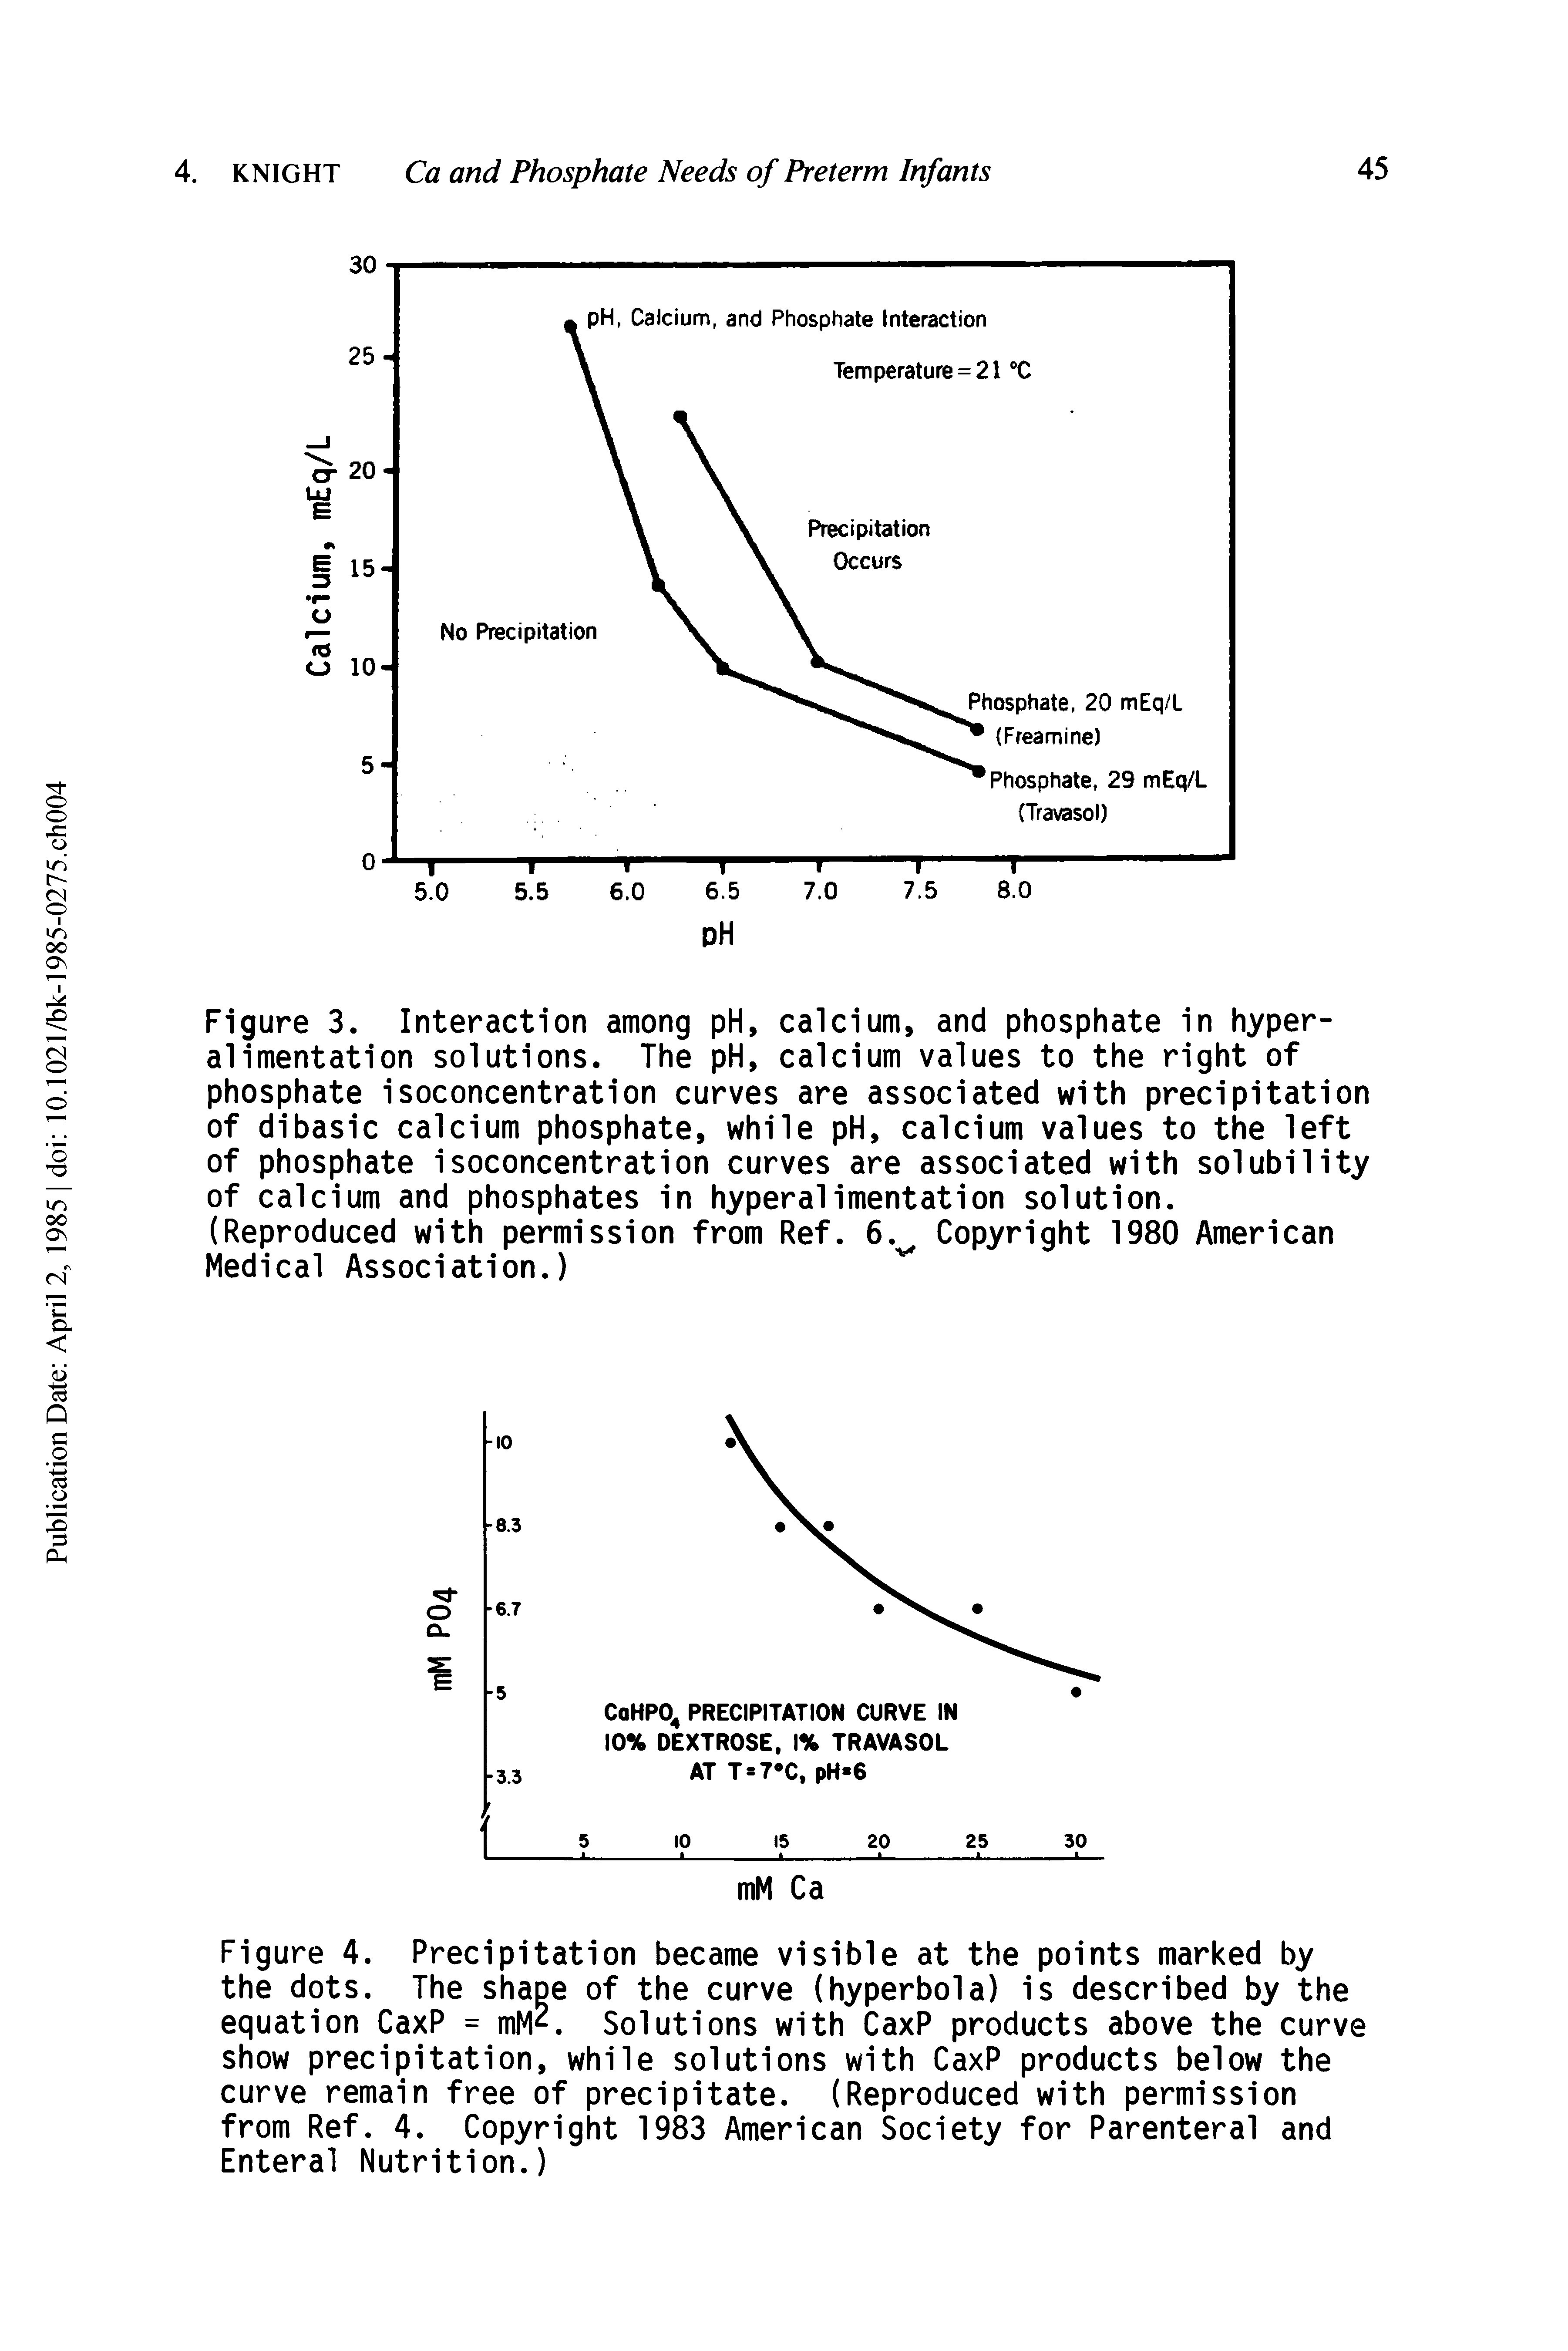 Figure 3. Interaction among pH, calcium, and phosphate in hyperalimentation solutions. The pH, calcium values to the right of phosphate isoconcentration curves are associated with precipitation of dibasic calcium phosphate, while pH, calcium values to the left of phosphate isoconcentration curves are associated with solubility of calcium and phosphates in hyperalimentation solution.